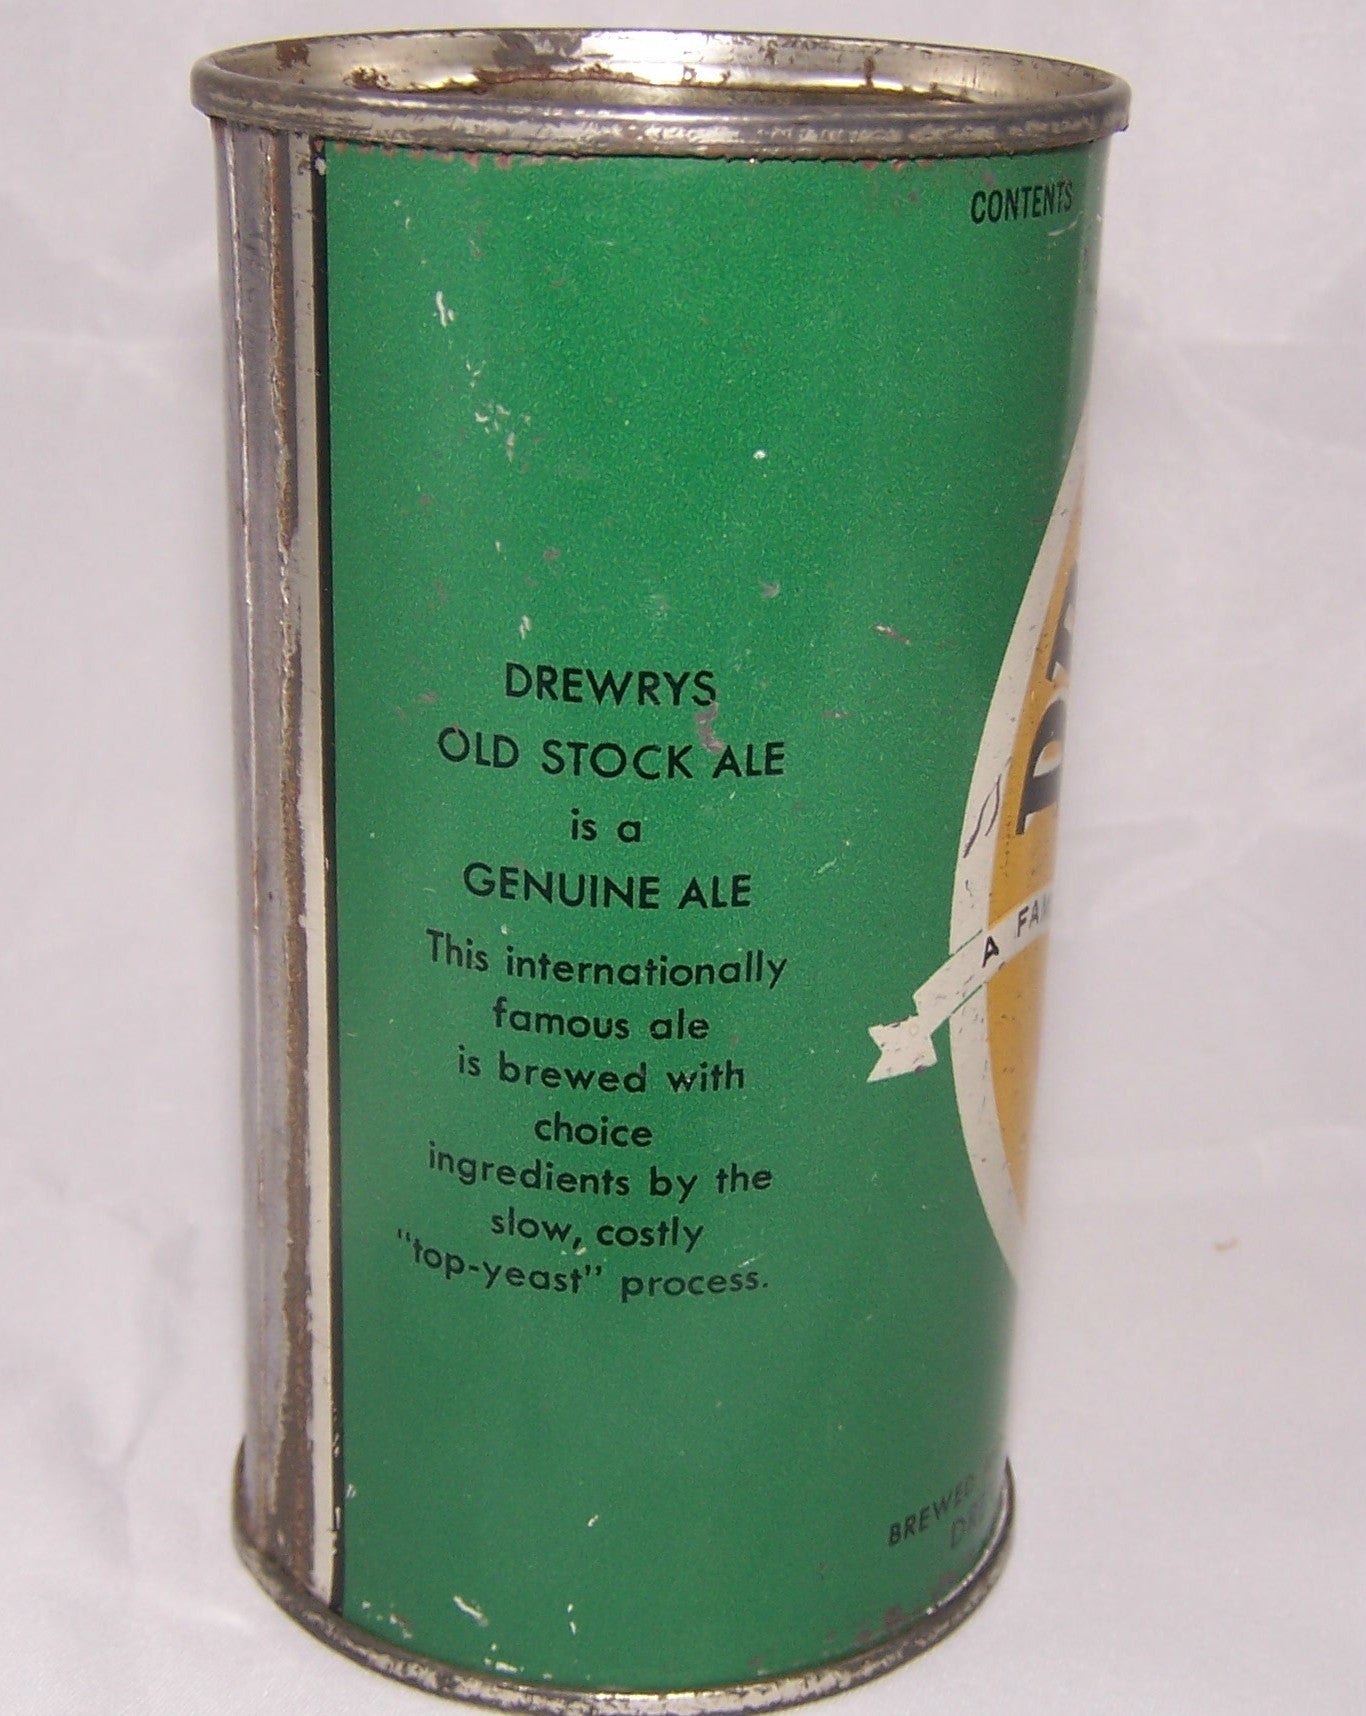 Drewrys Old Stock Ale, USBC 55-28, Grade 1- Sold on 04/16/16